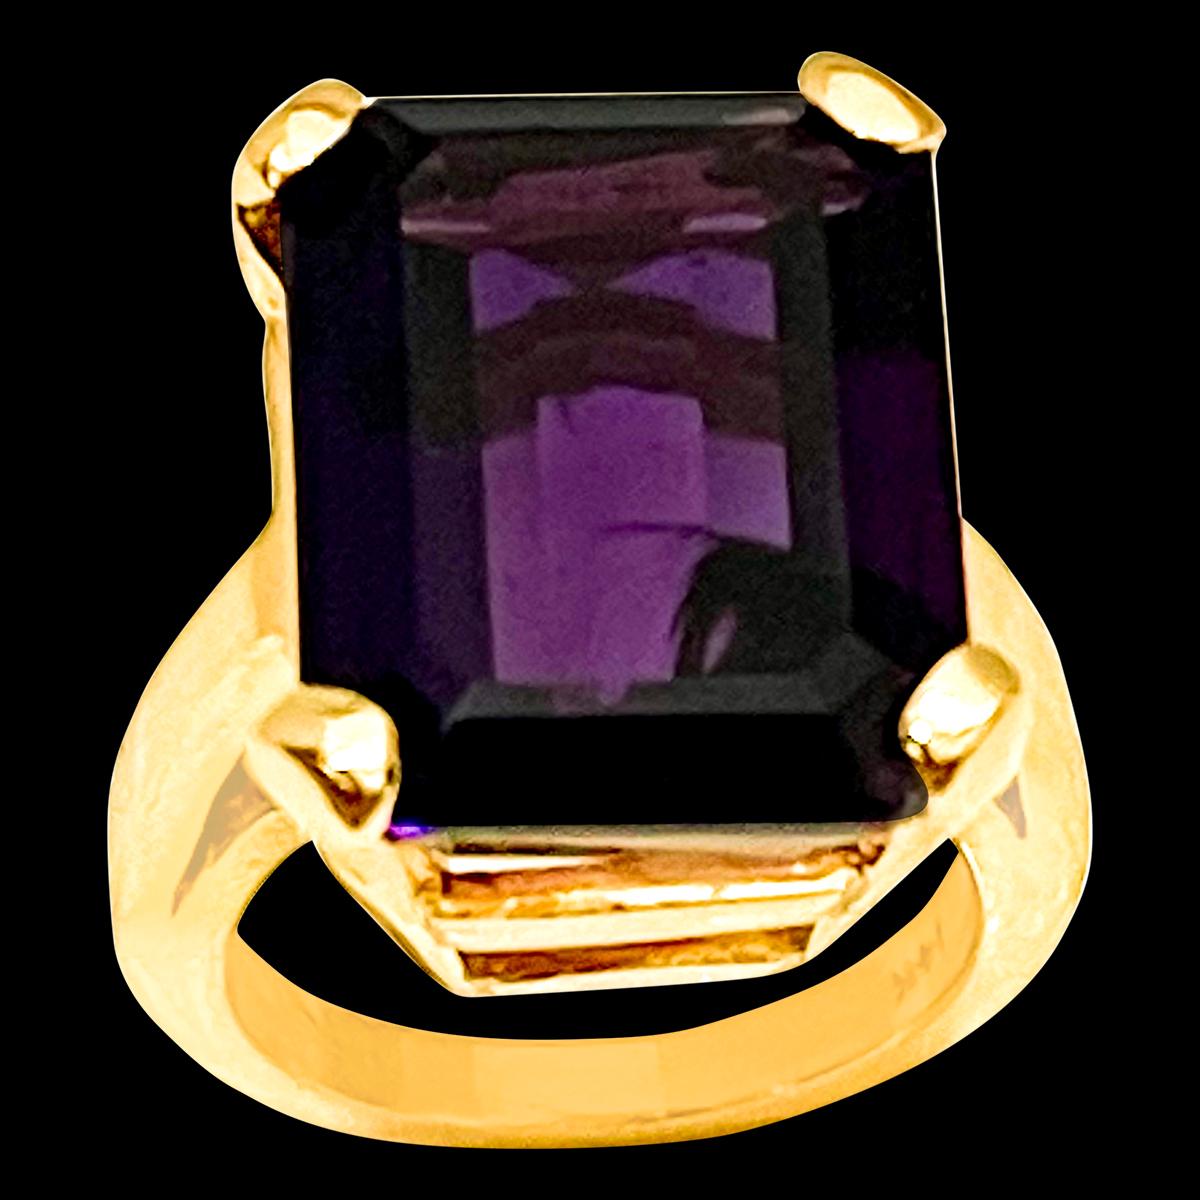 Approximately 15 Carat Emerald Cut Amethyst  Cocktail Ring in 14 Karat Yellow Gold Size 5
18 x 14 MM Amethyst  Cocktail Ring in 14 Karat Yellow Gold 

This is a Beautiful Cocktail ring ring which has a large approximately 15 carat of  Amethyst .